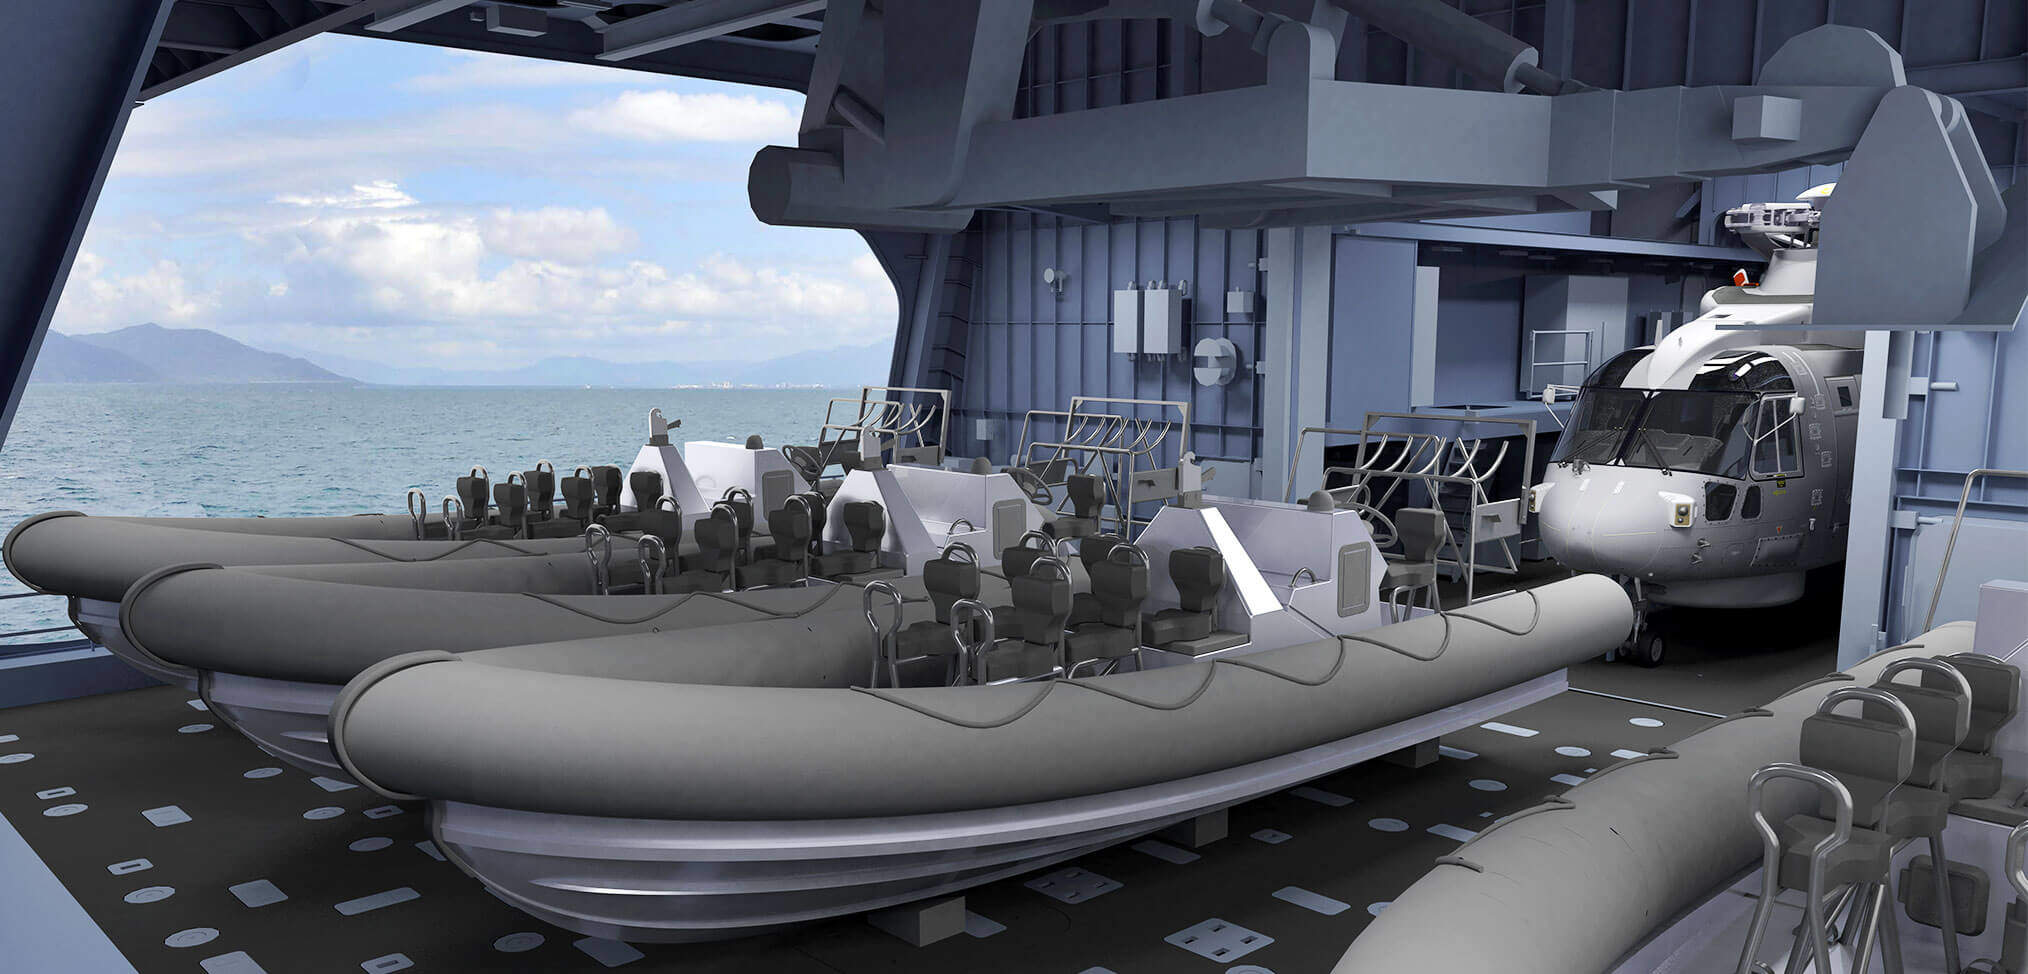 The Type 26 frigate mission bay. Part 1 – design and development